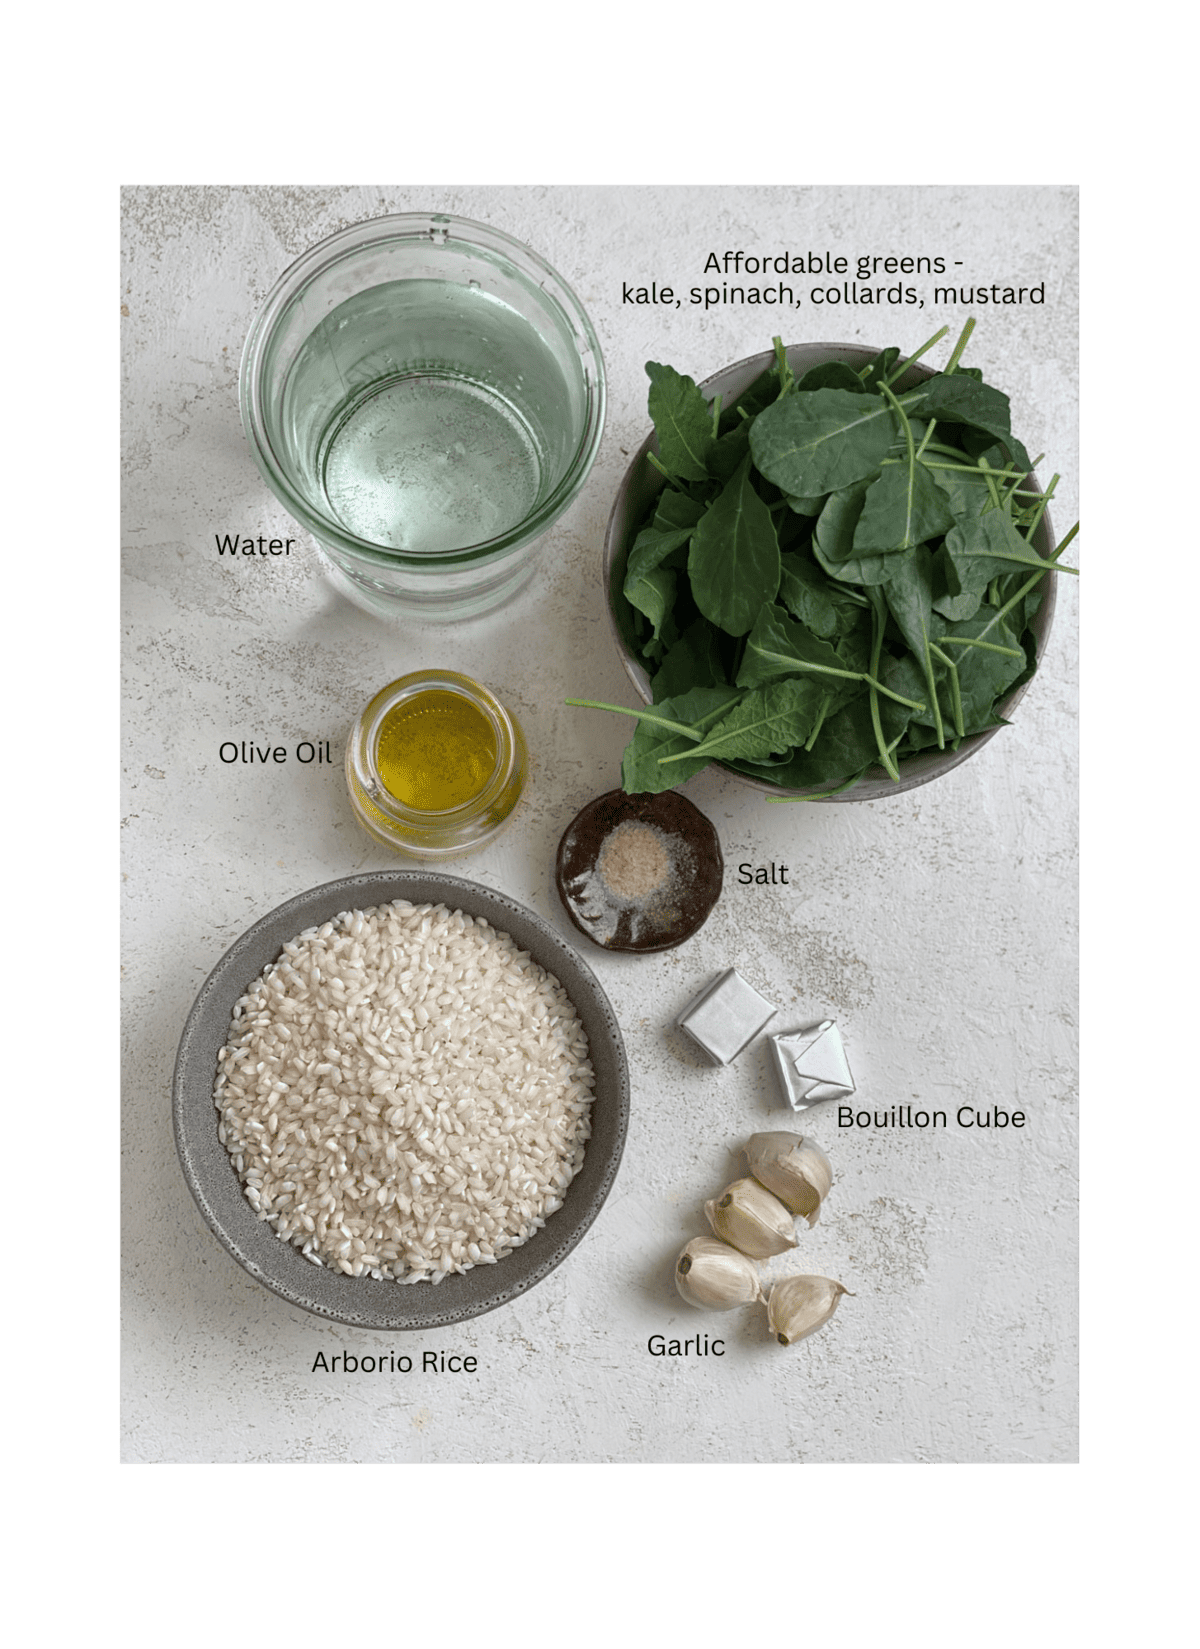 ingredients for Slow Cooker Risotto with Kale measured out against a white surface